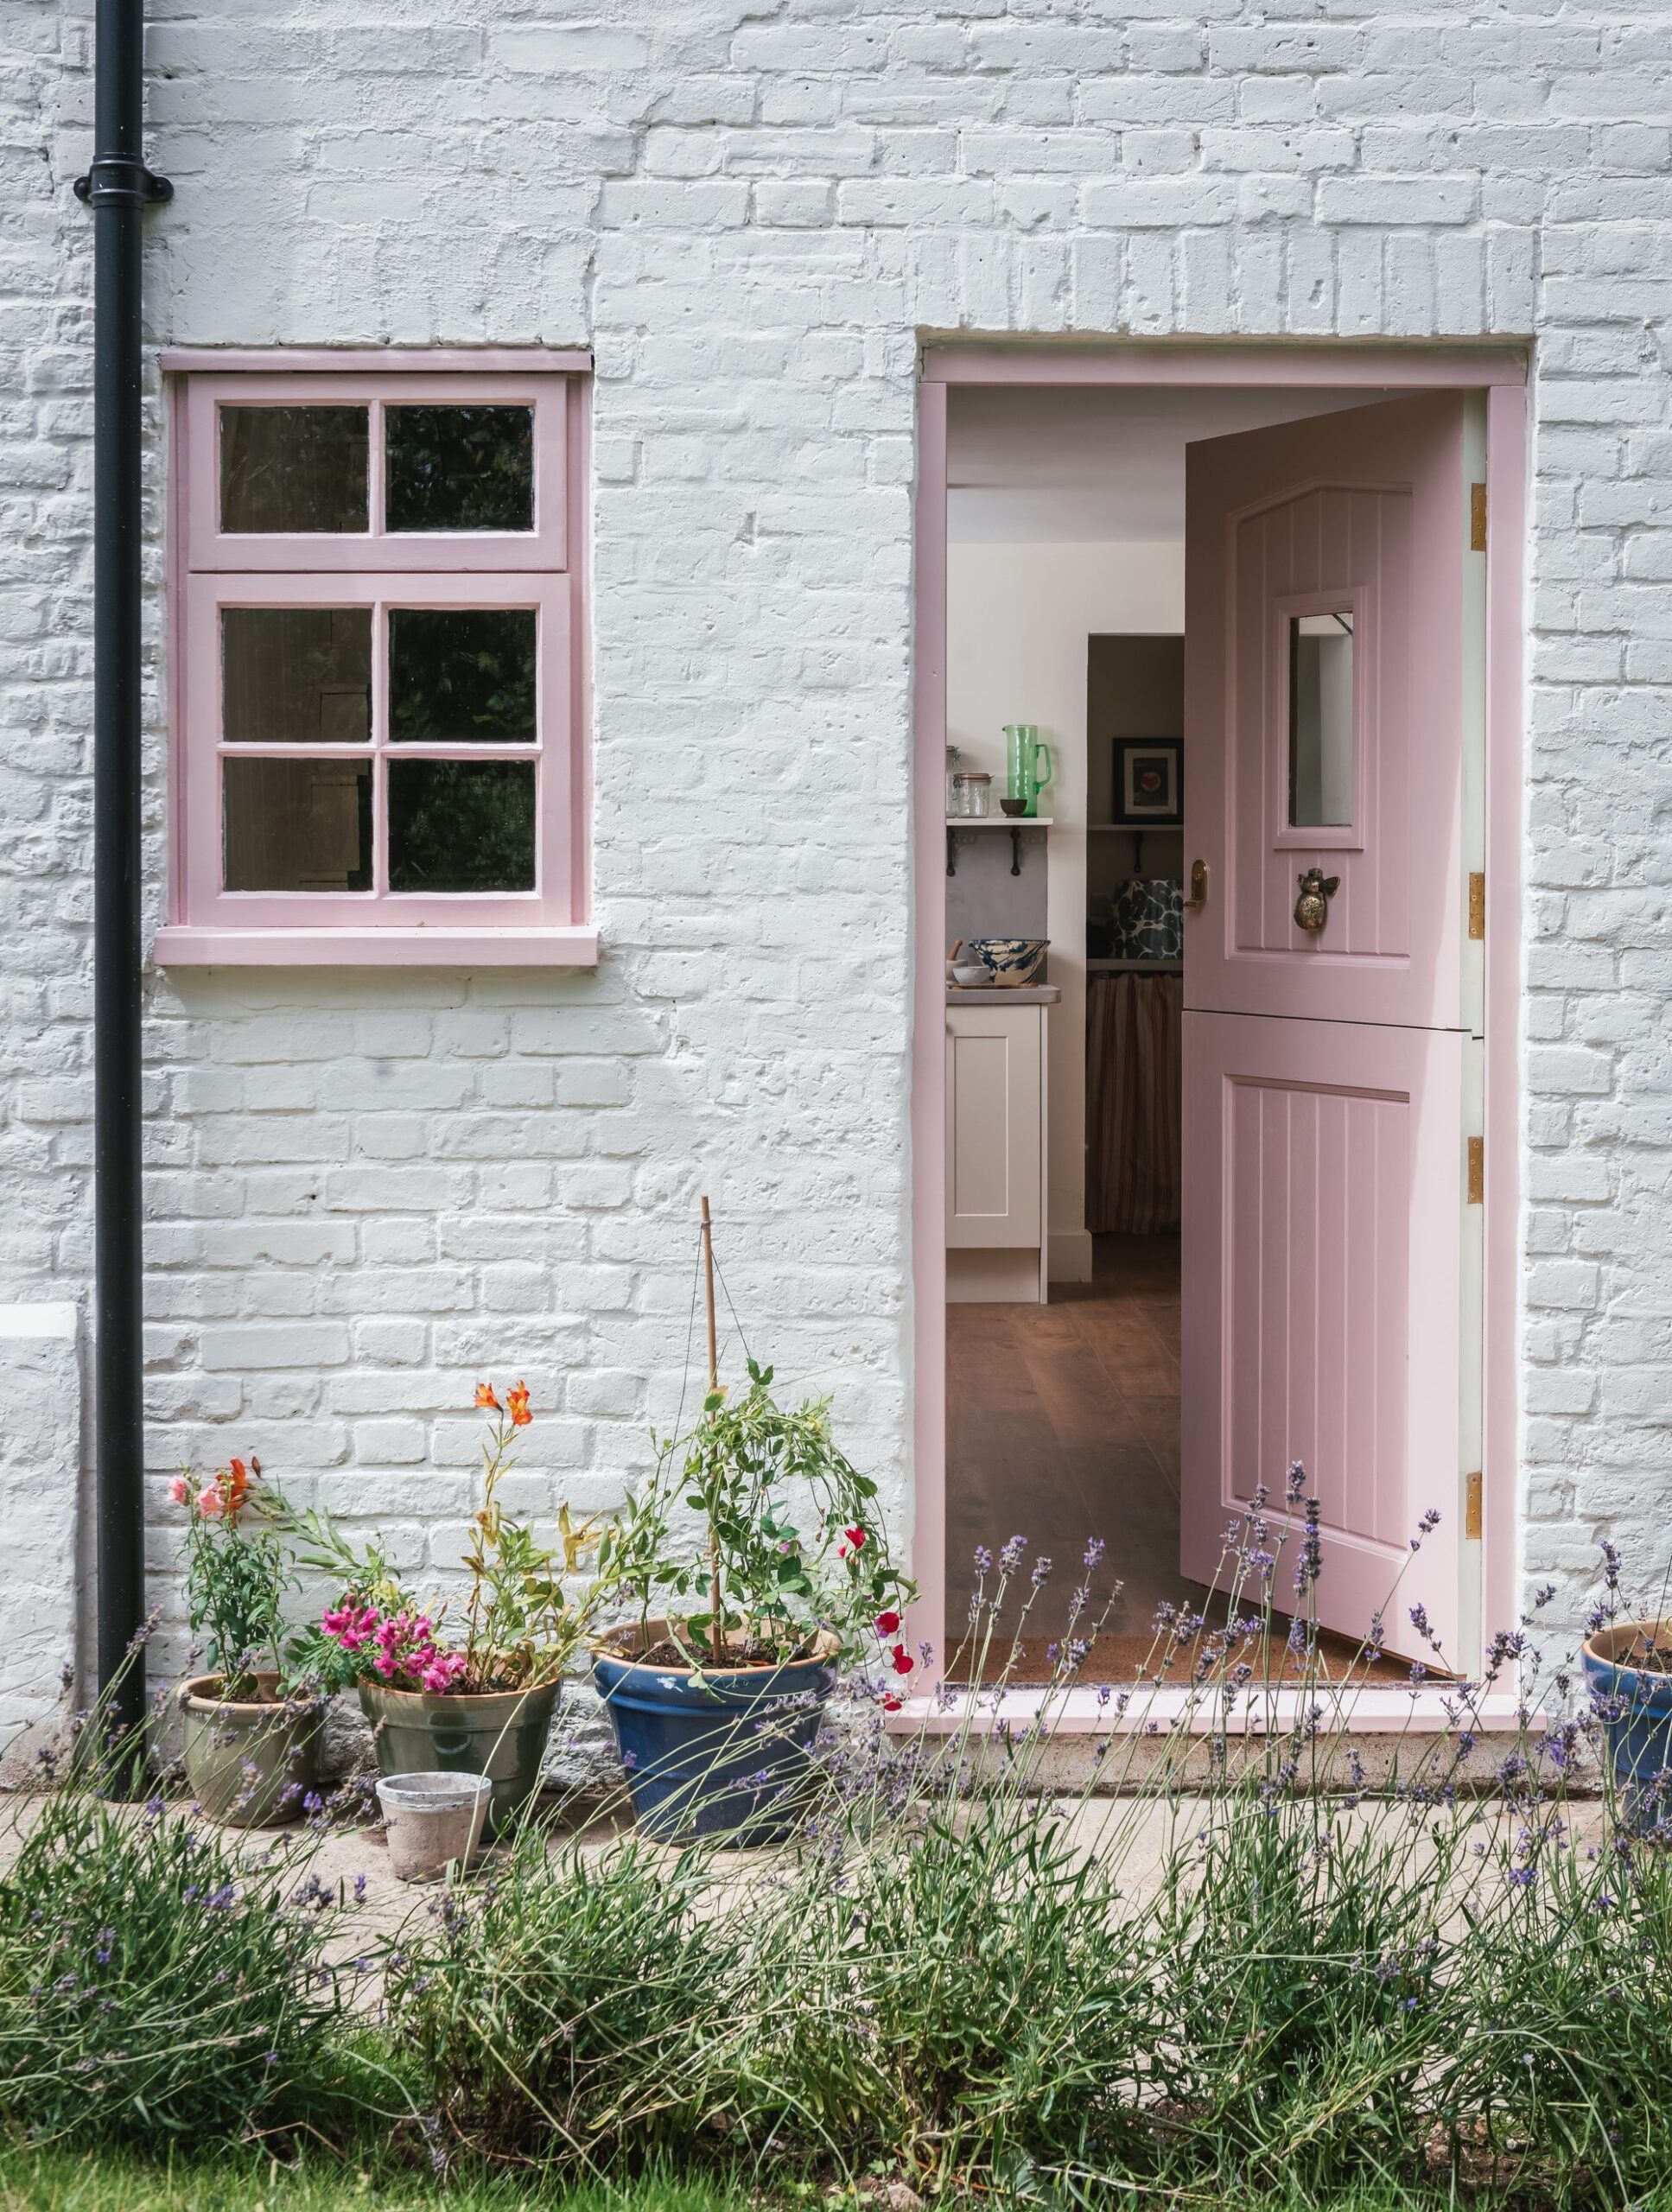 Historical English Cottage Step back in time with a charming English country home